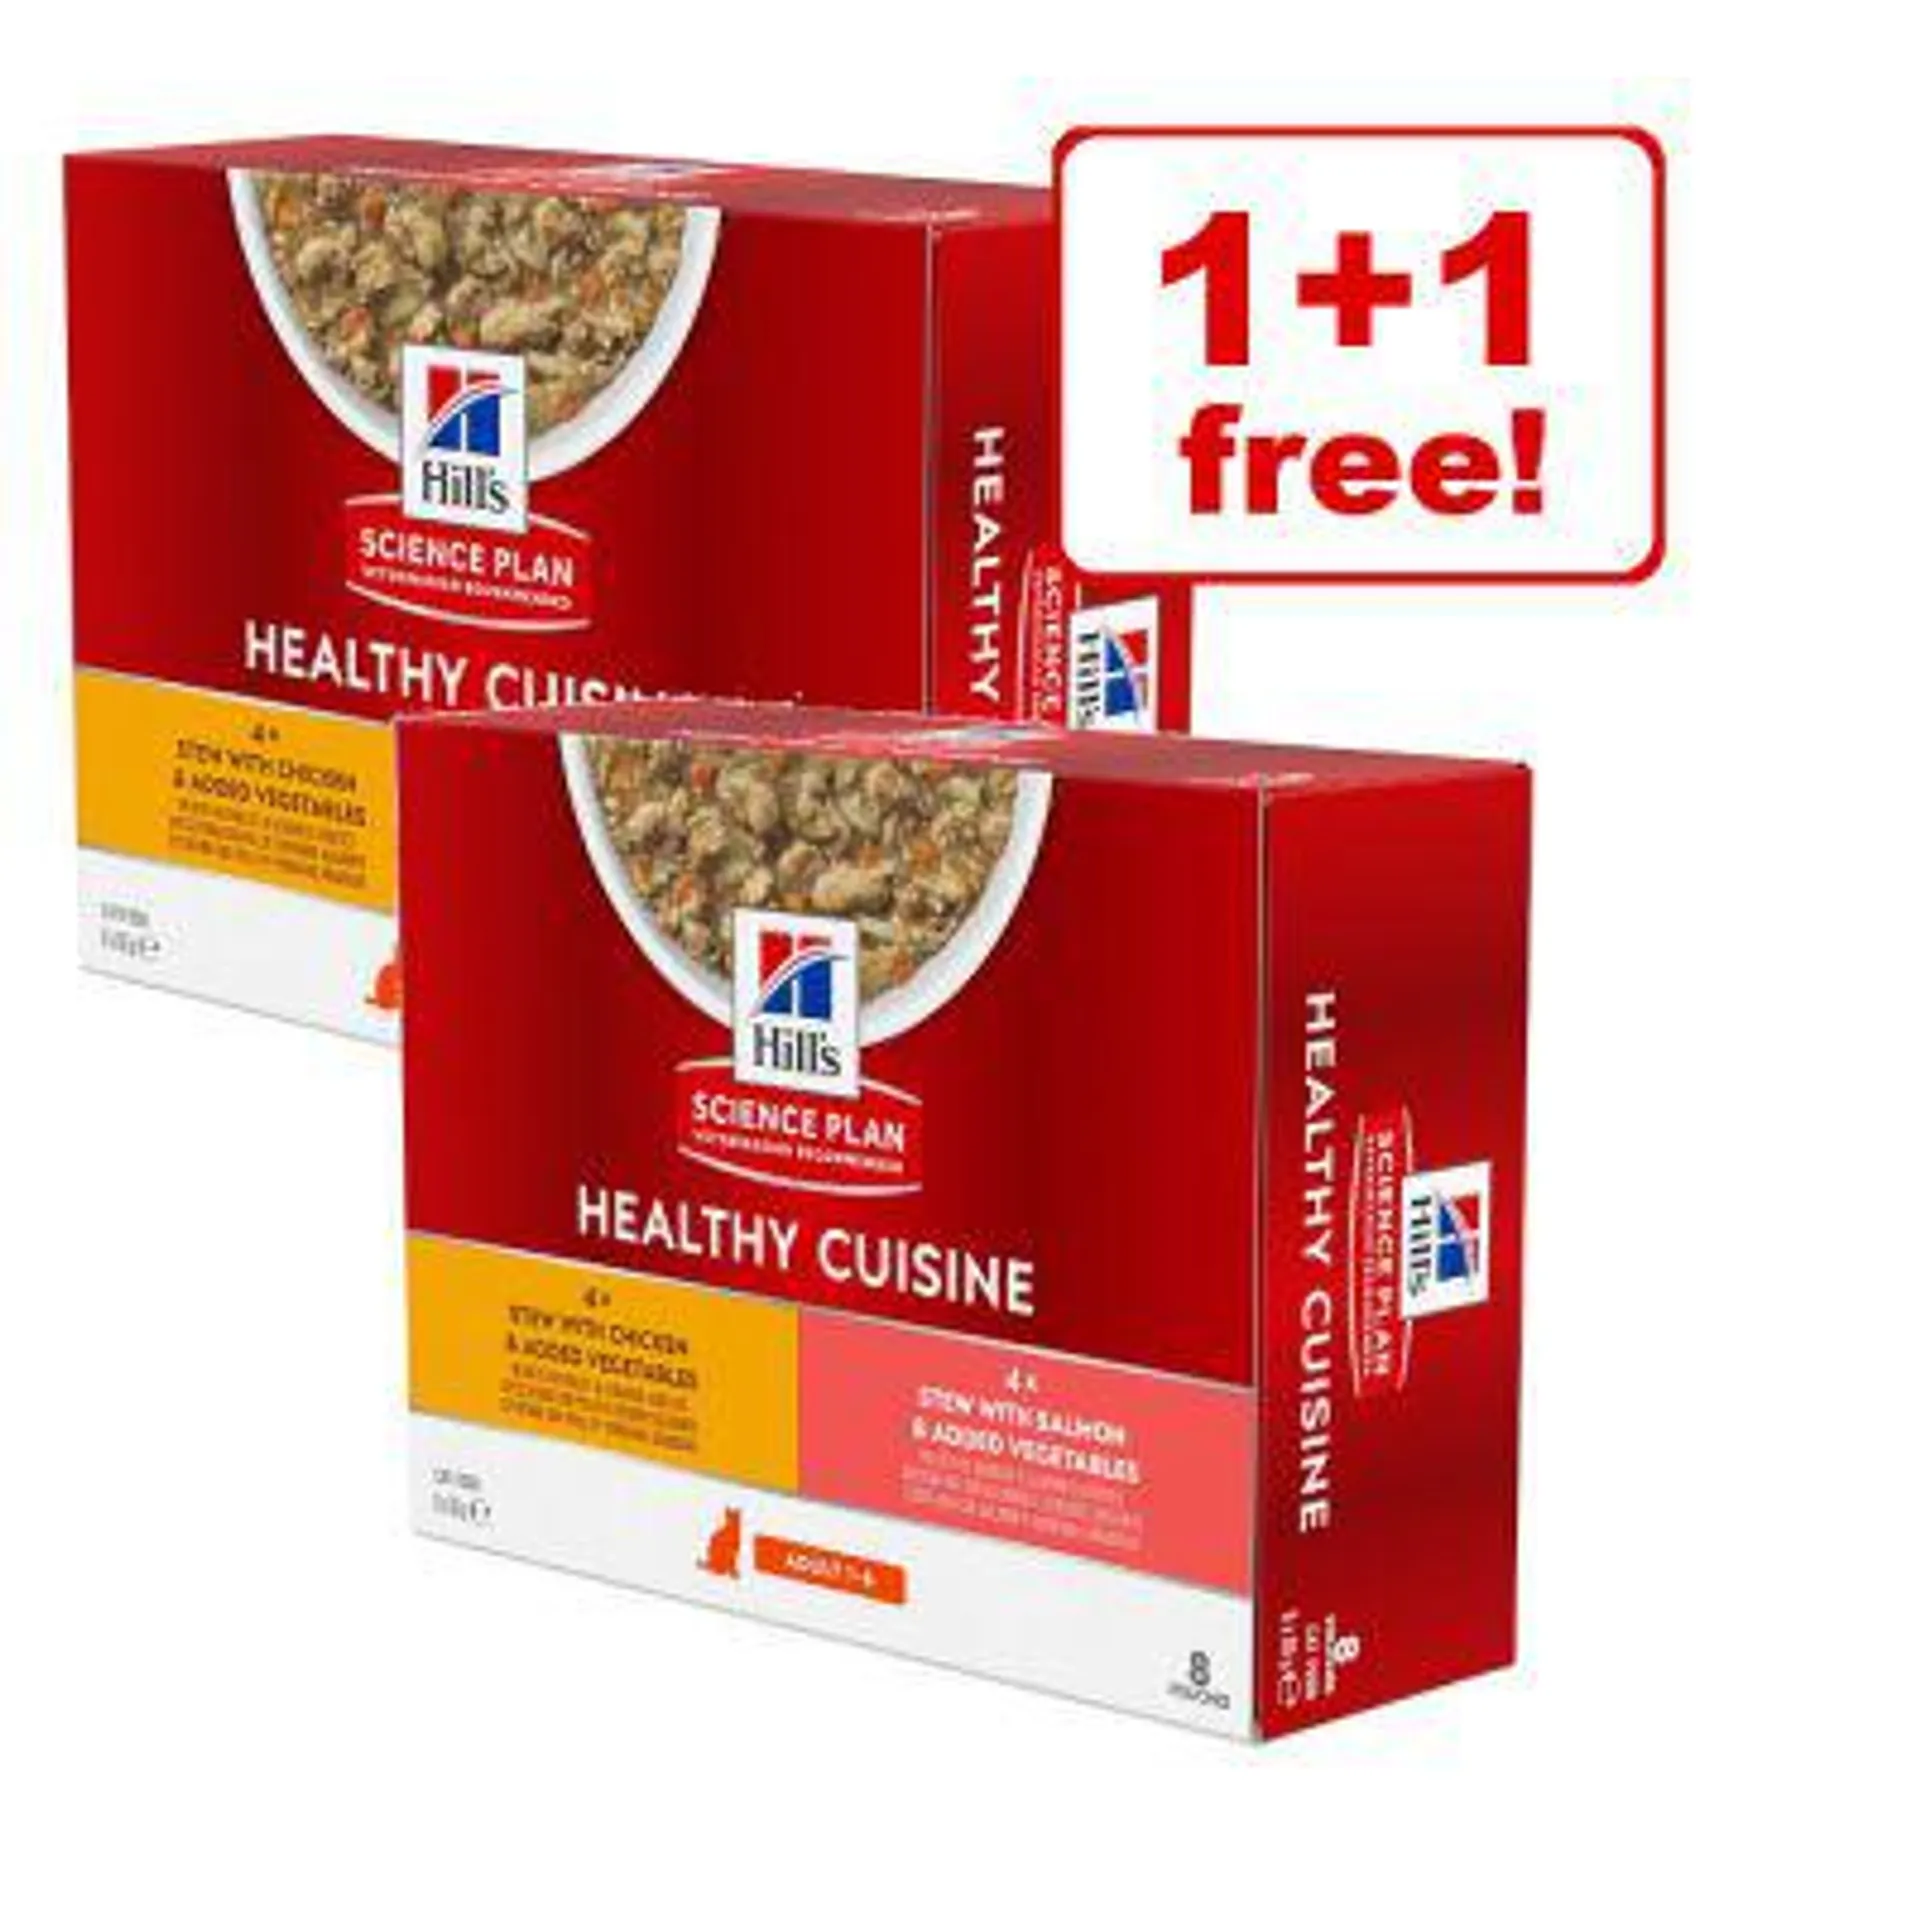 12 x 80g Hill's Science Plan Healthy Cuisine - Buy One Get One Free!*